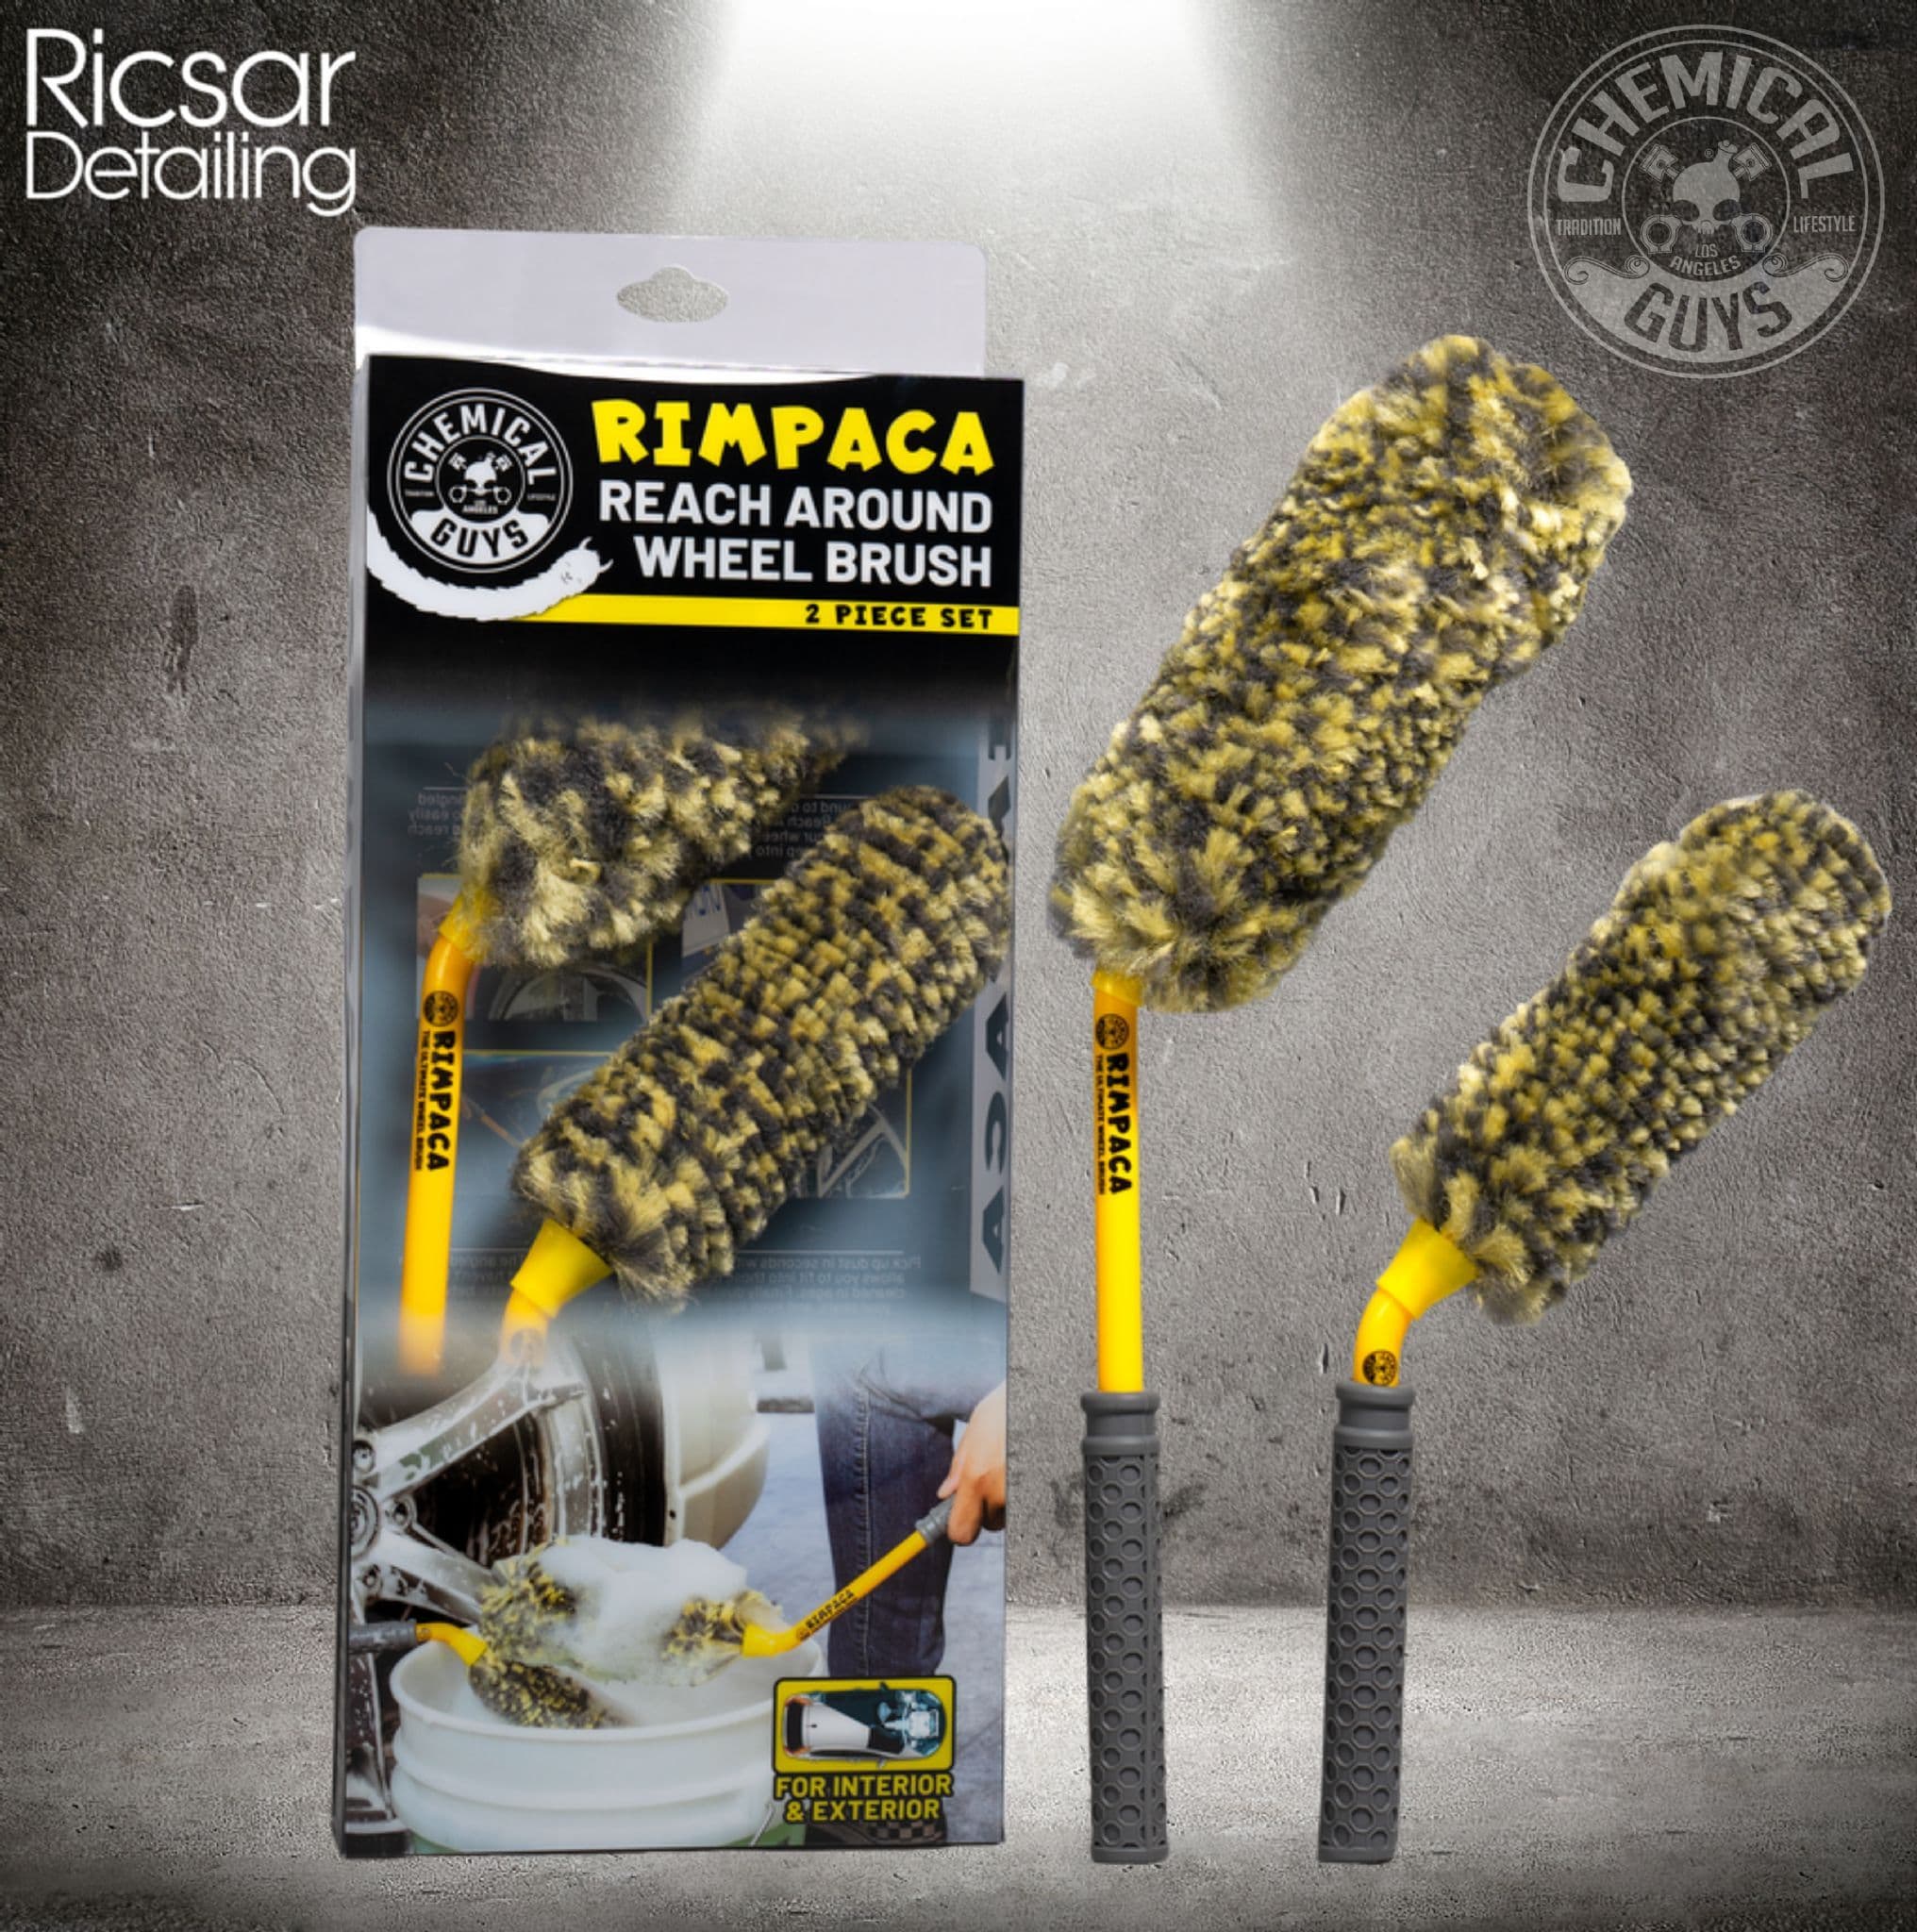 Chemical Guys - Make cleaning easier with the Rimpaca Ultimate